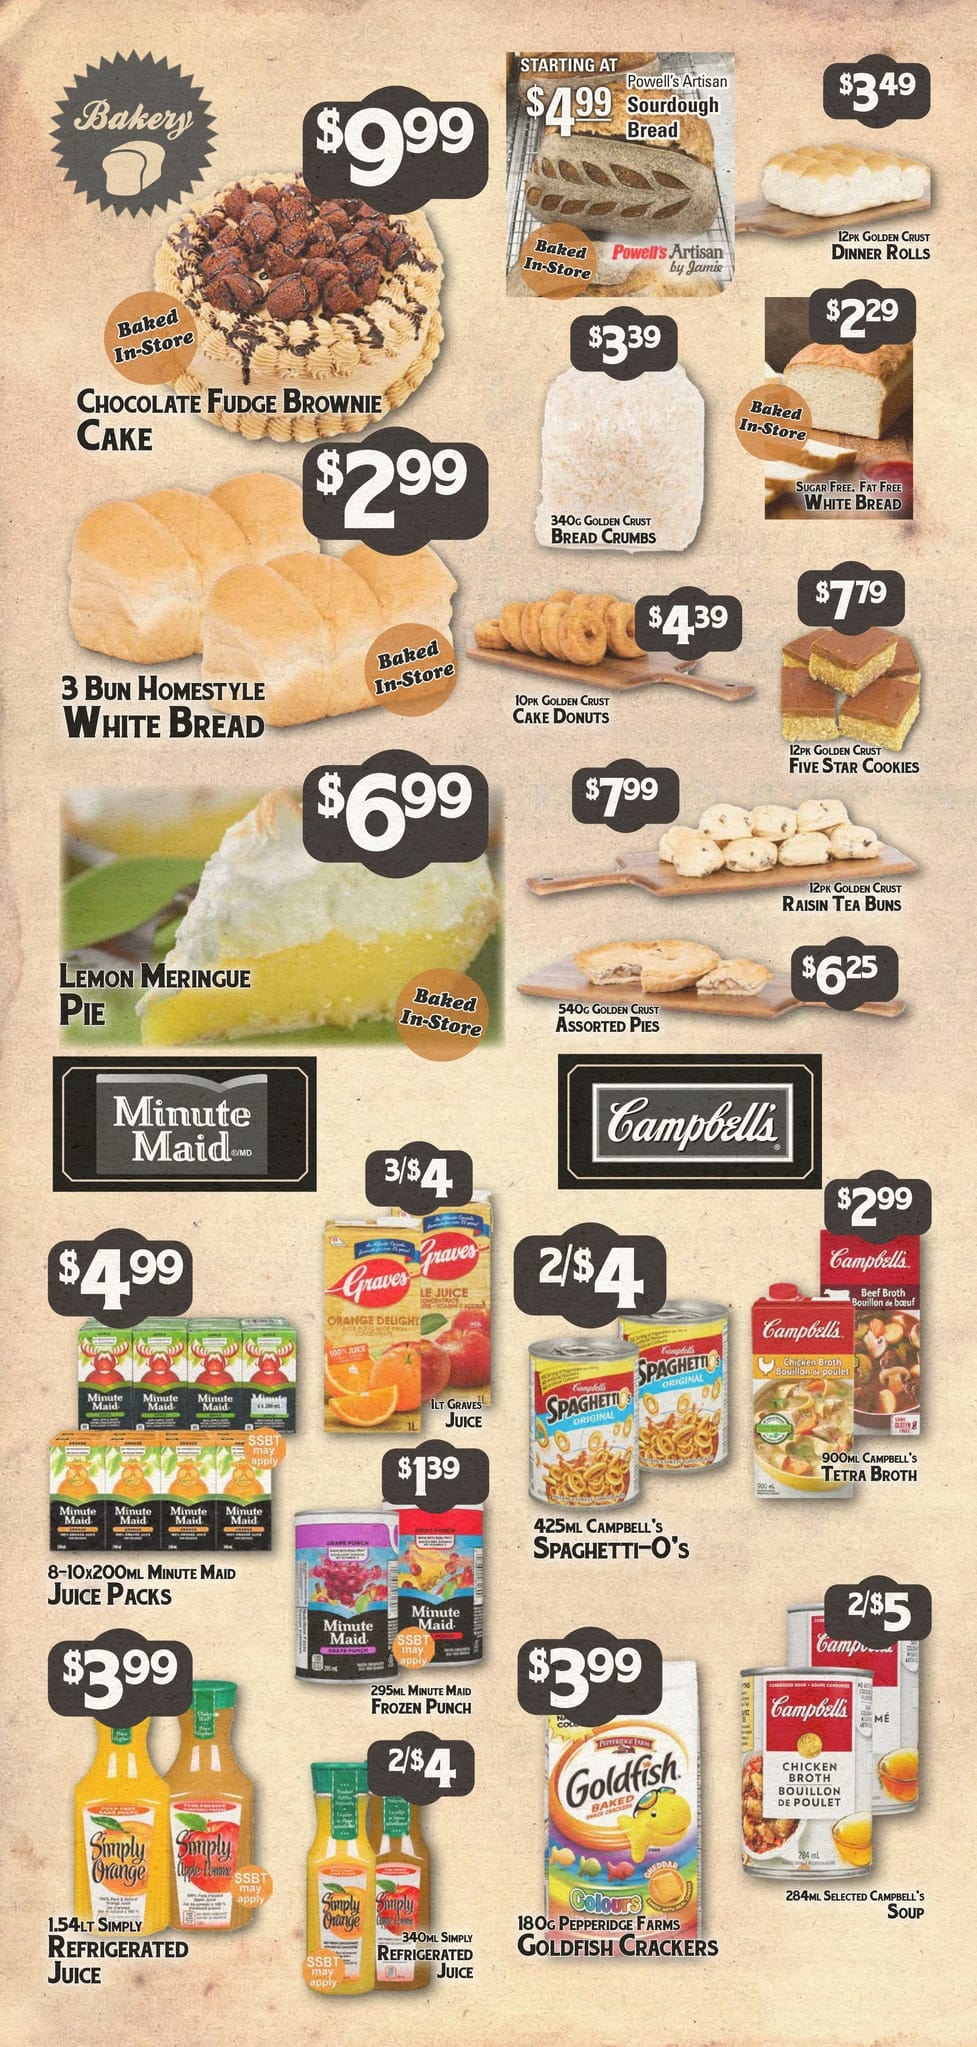 Powell's Supermarket - Weekly Flyer Specials - Page 6